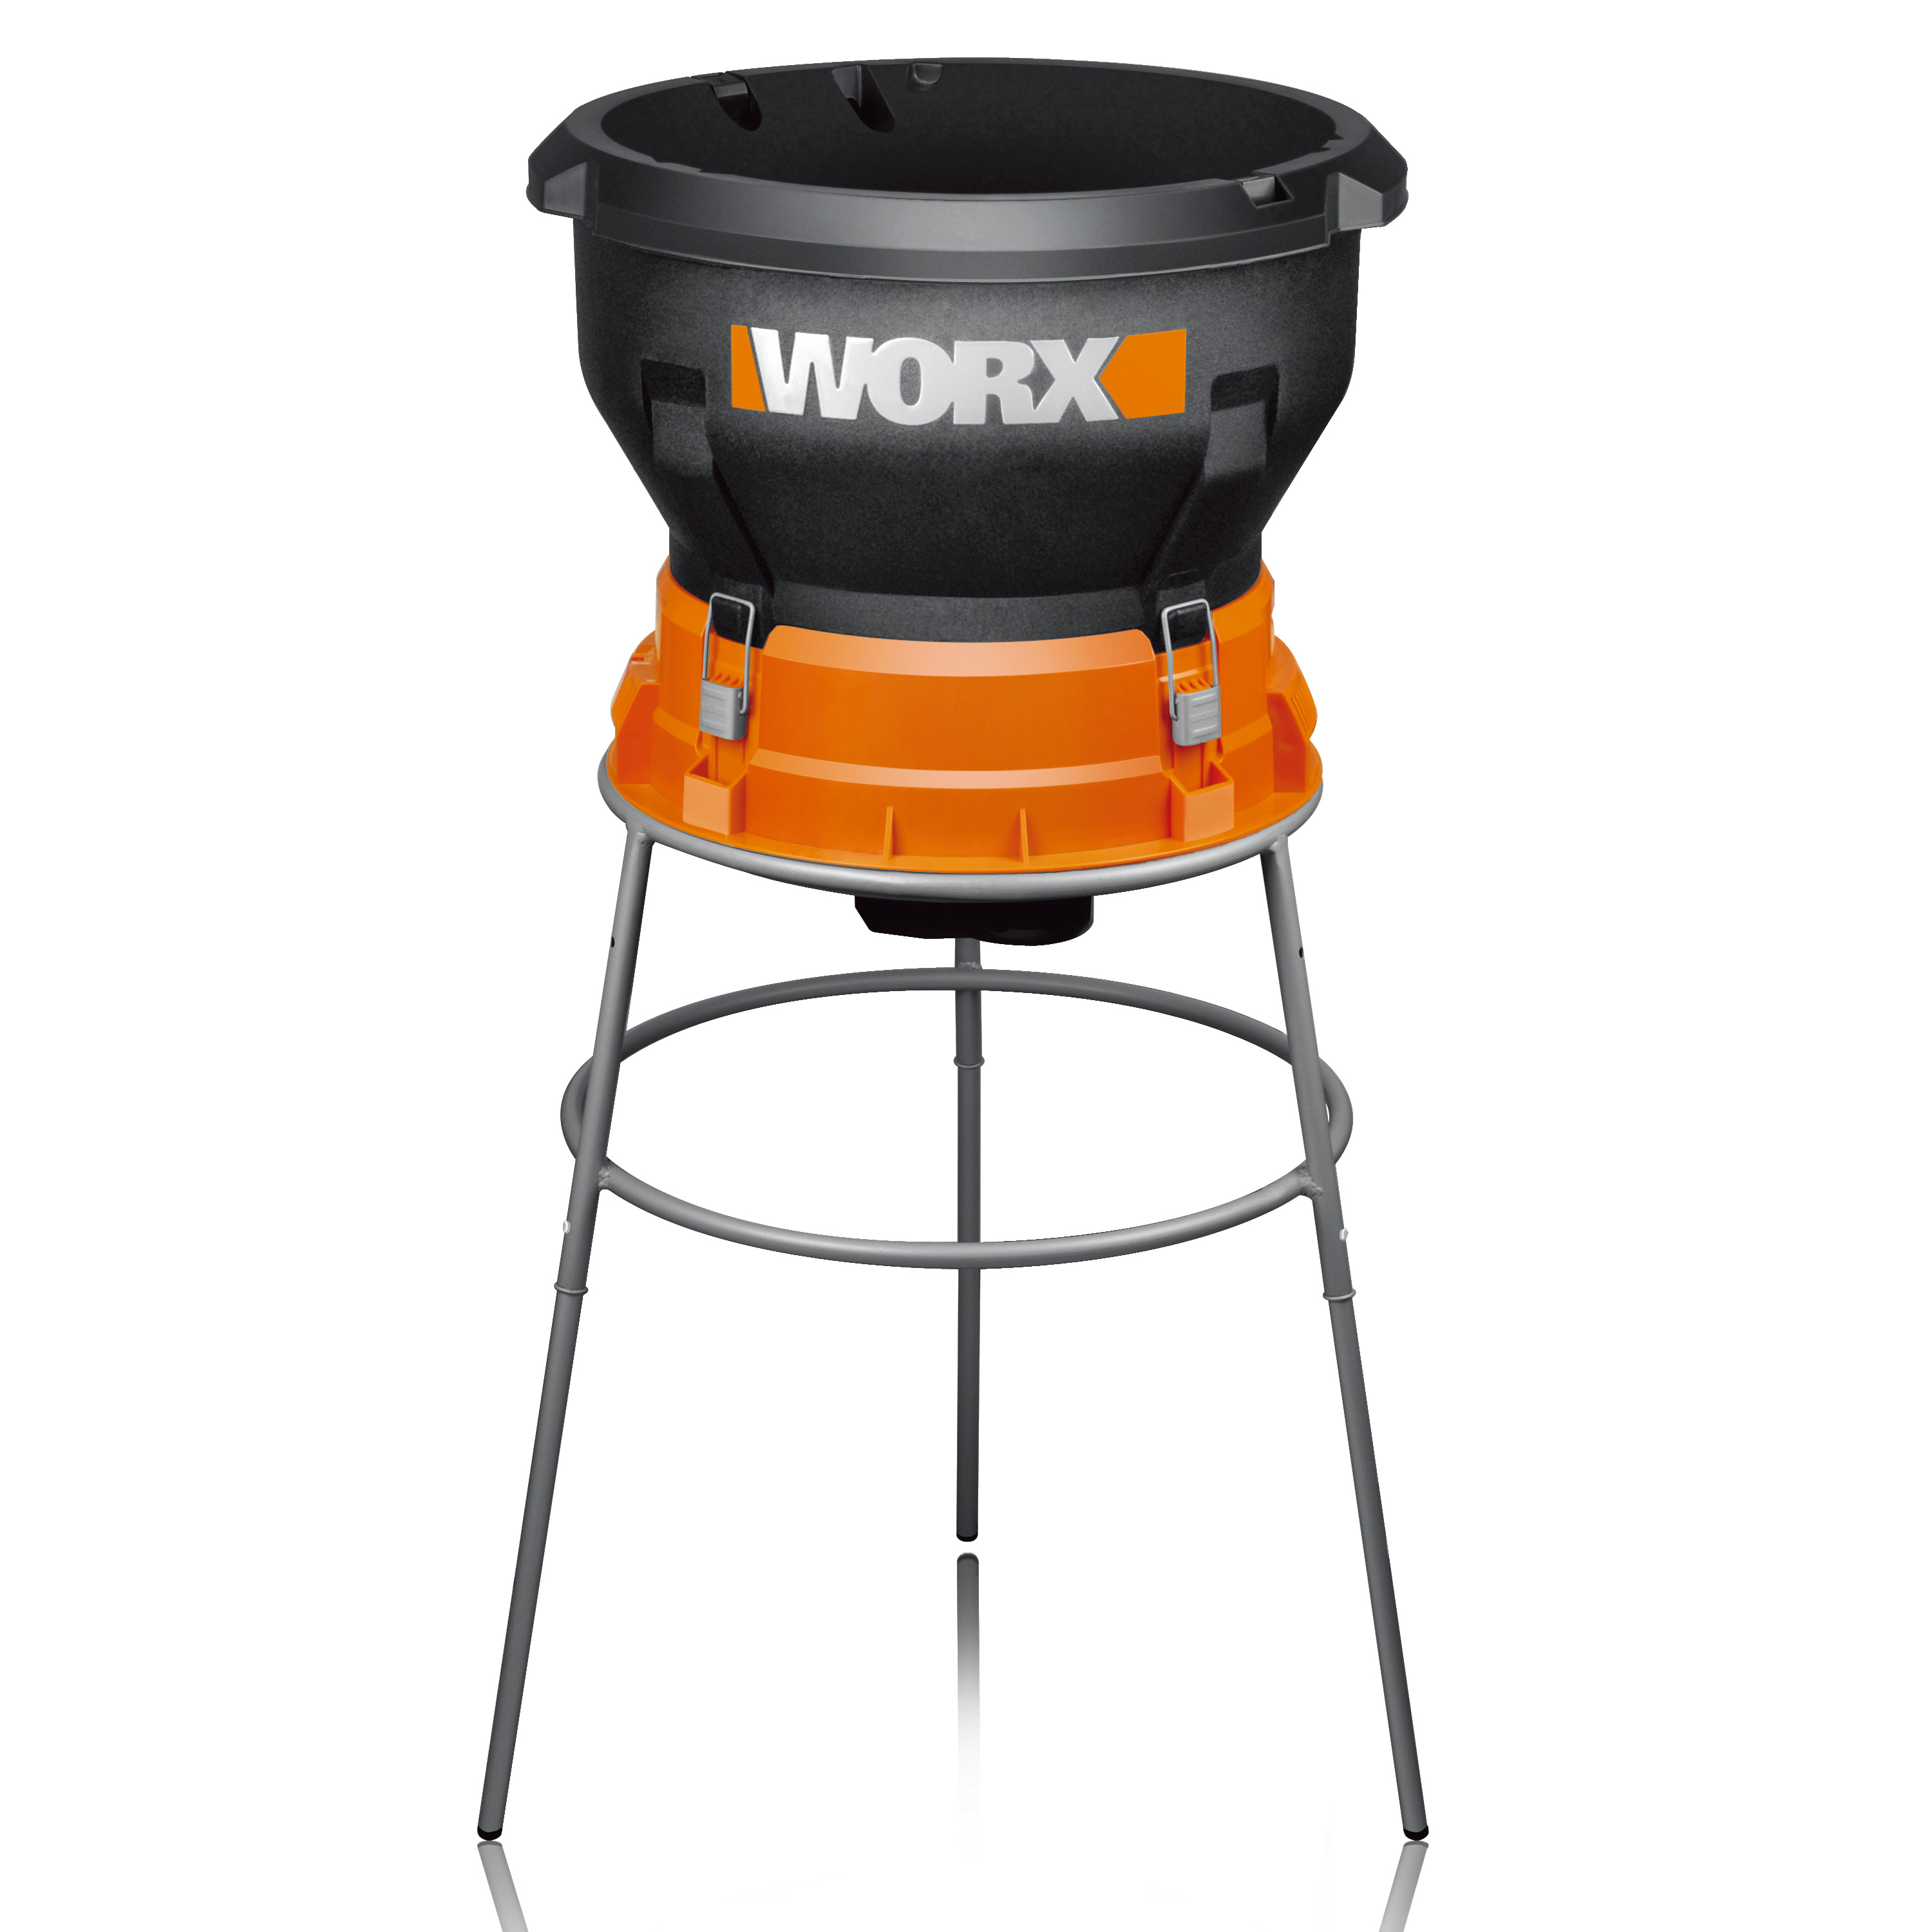 WORX 13-amp Electric Leaf Mulcher (WG430) shreds up to 53 gallons of leaves per minute.